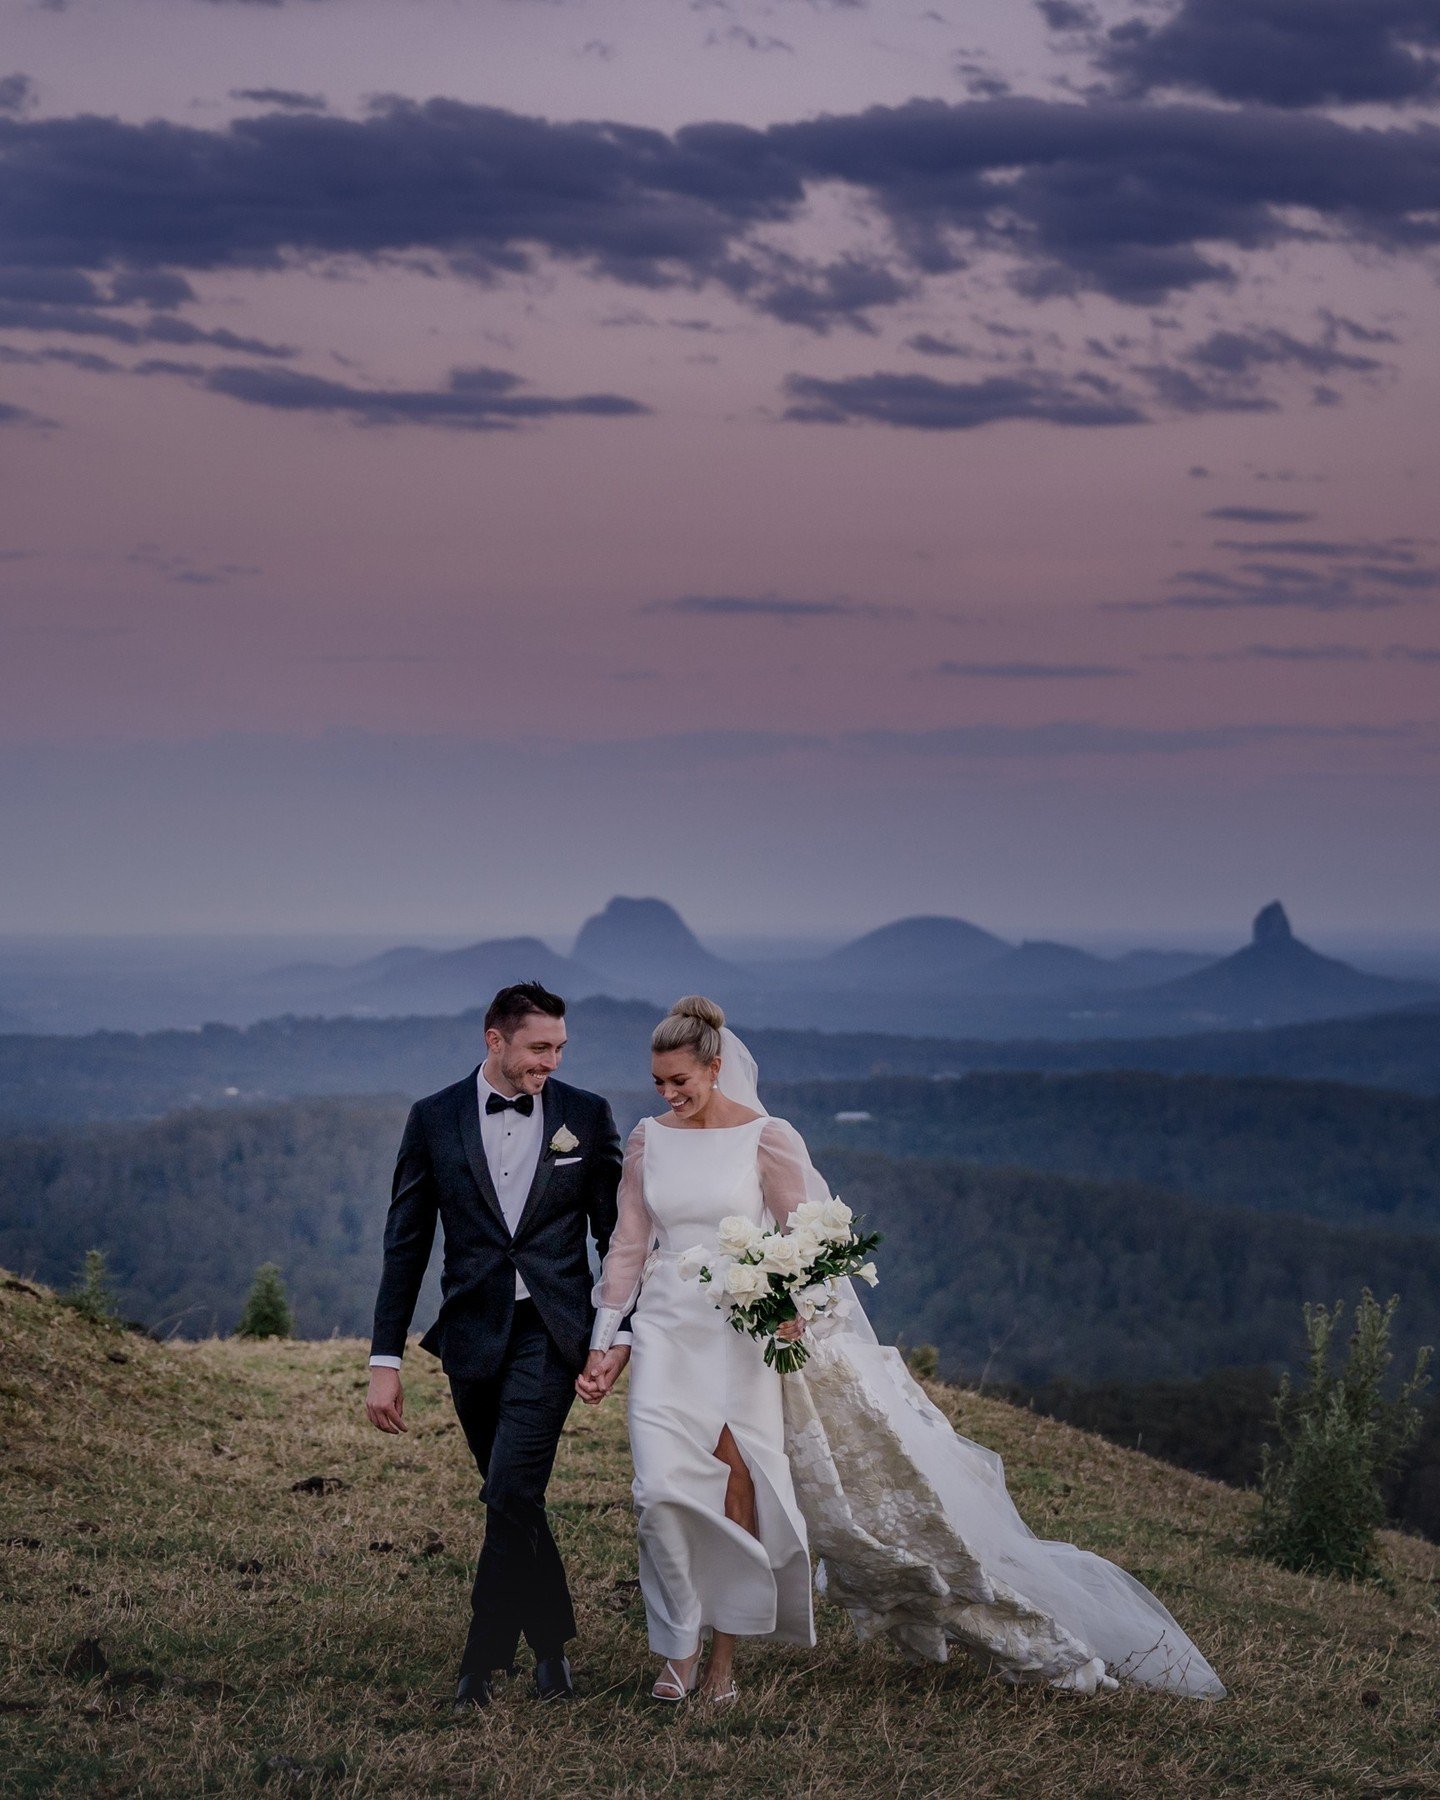 Olivia and Tom carving out their own path with the Glasshouse Mountains as the perfect backdrop ⁠
⁠
⁠
⁠
⁠
⁠
⁠